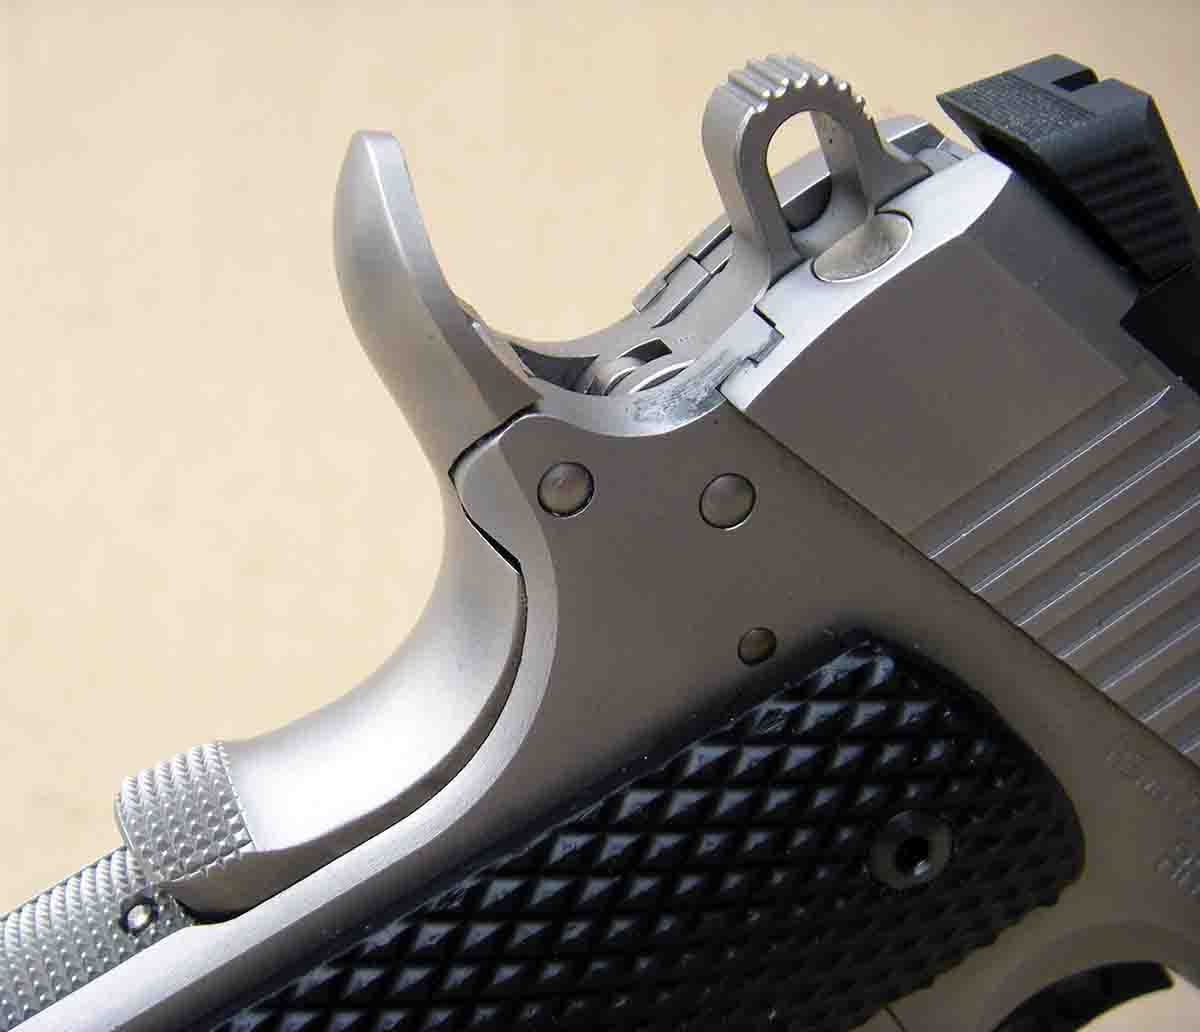 The grip safety is a beavertail pattern that offers the shooter a high grip and features a knurled memory pad.